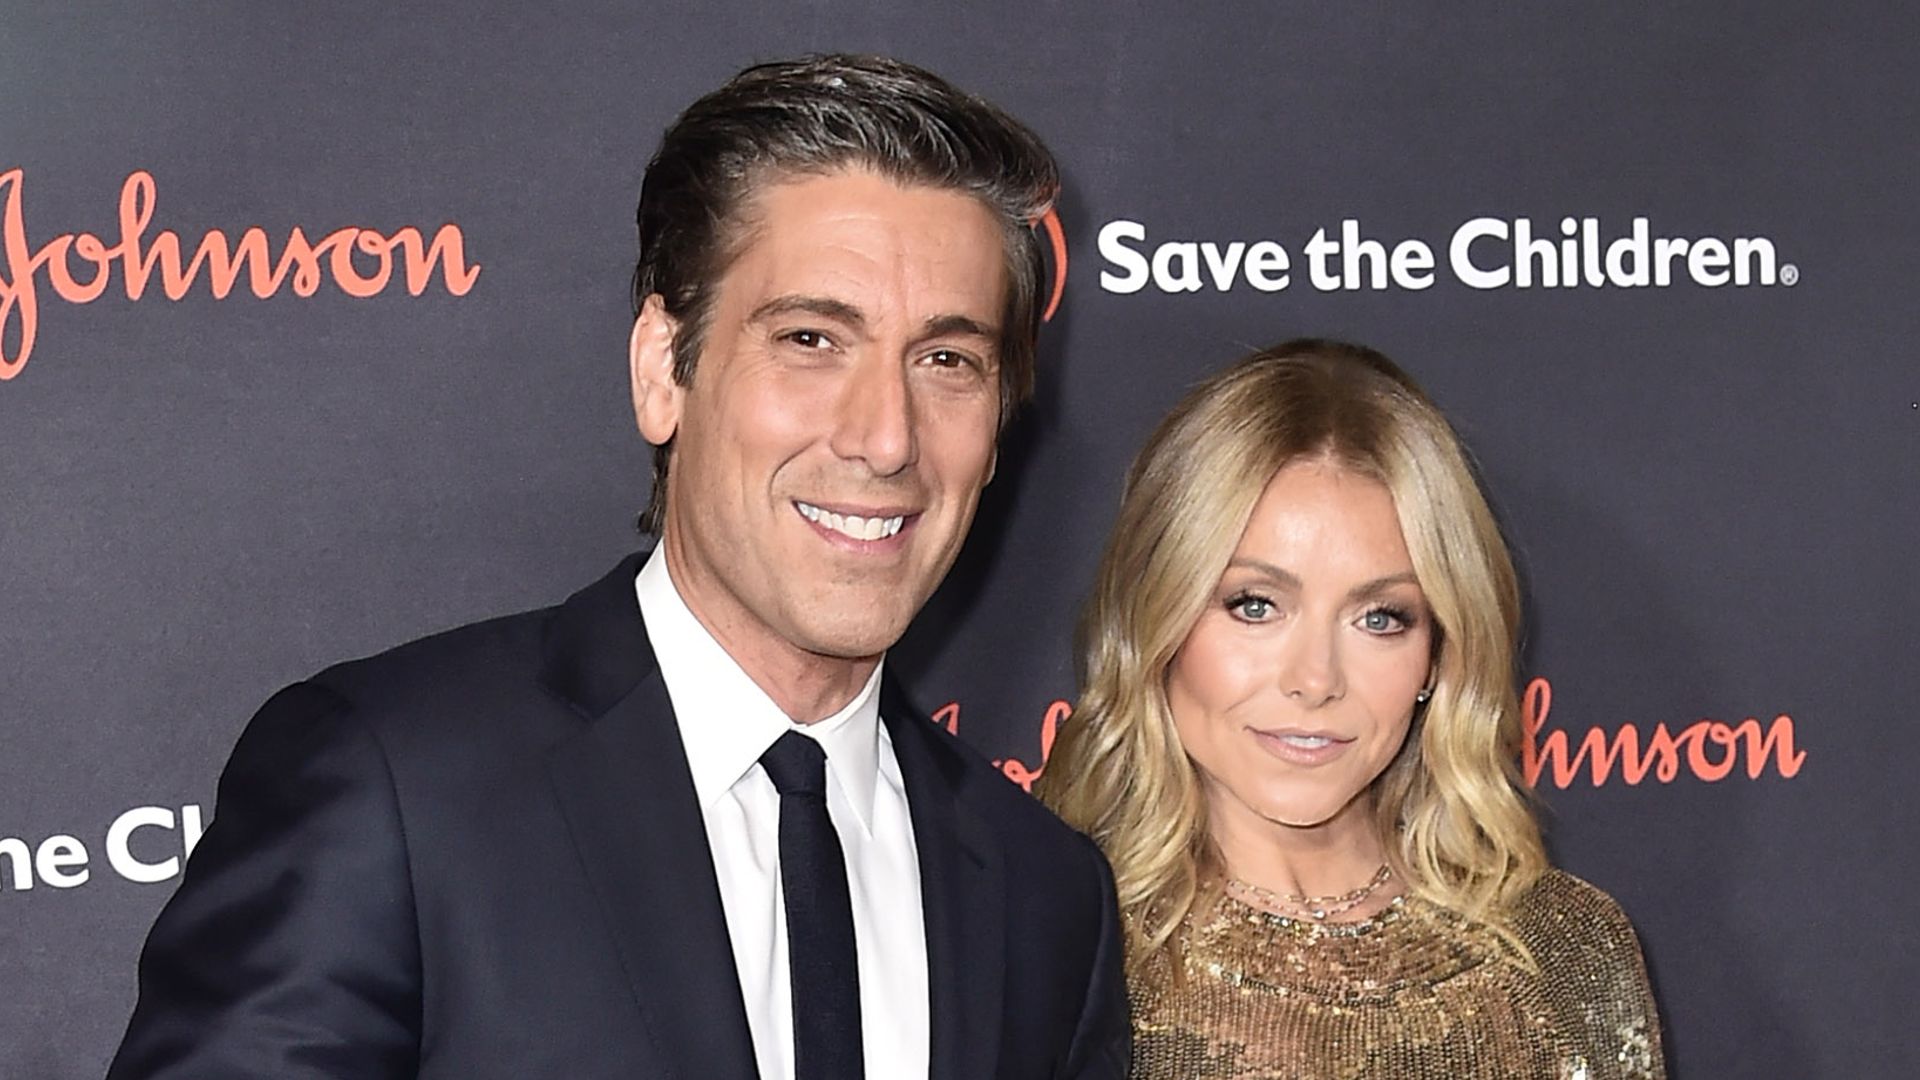 Anchorman/journalist David Muir and actress/TV Host Kelly Ripa attends the 6th Annual Save the Children Illumination Gala at the American Museum of Natural History in New York City on November 14, 2018.